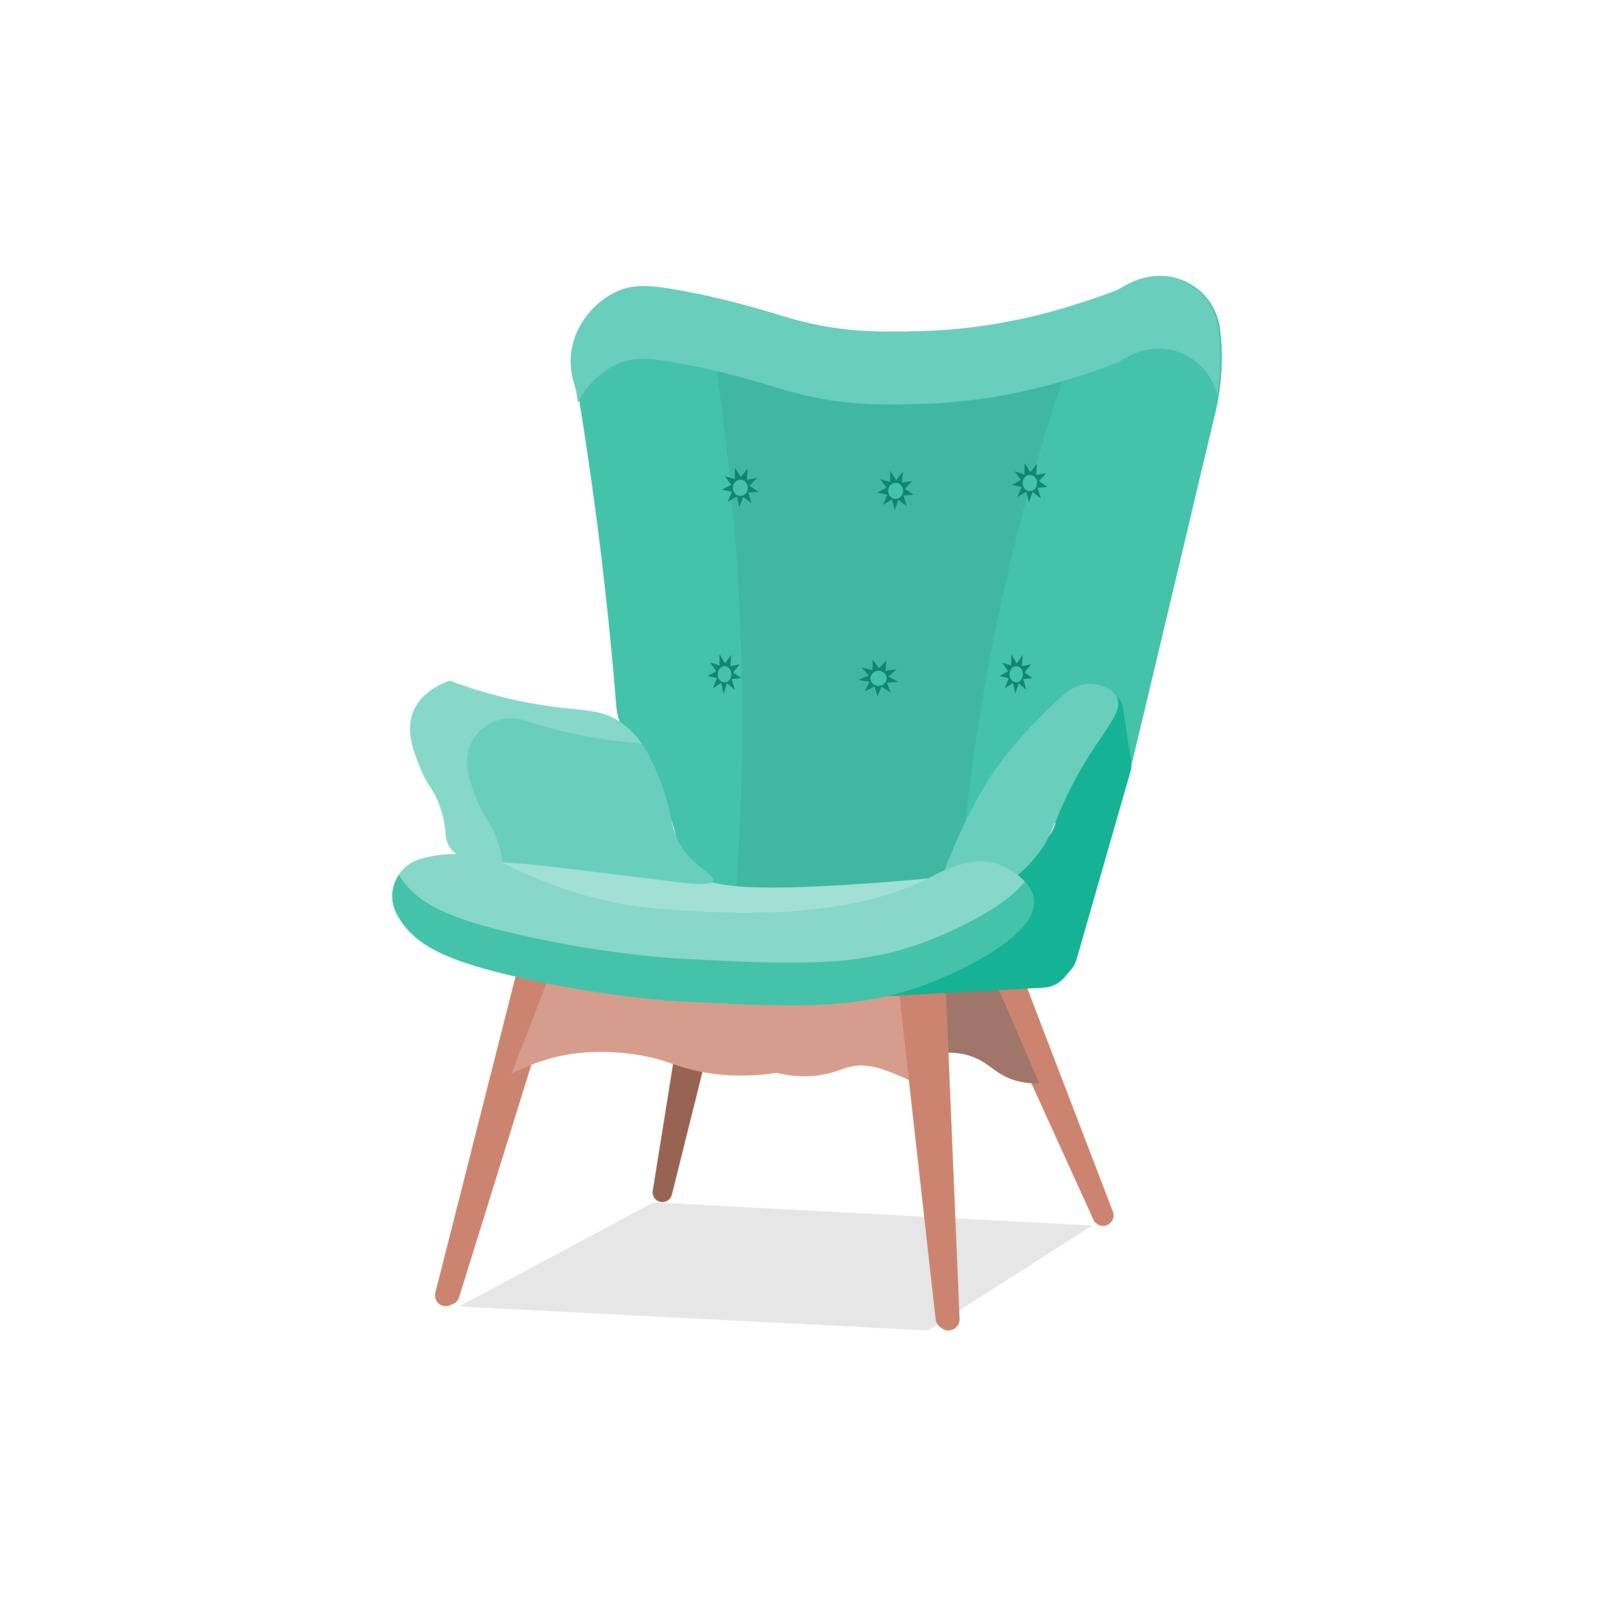 Stylish trendy model of an armchair in a trendy green color with armrests on wooden legs. Isolated vector illustration of cozy interior item in cartoon flat style. EPS by Alxyzt